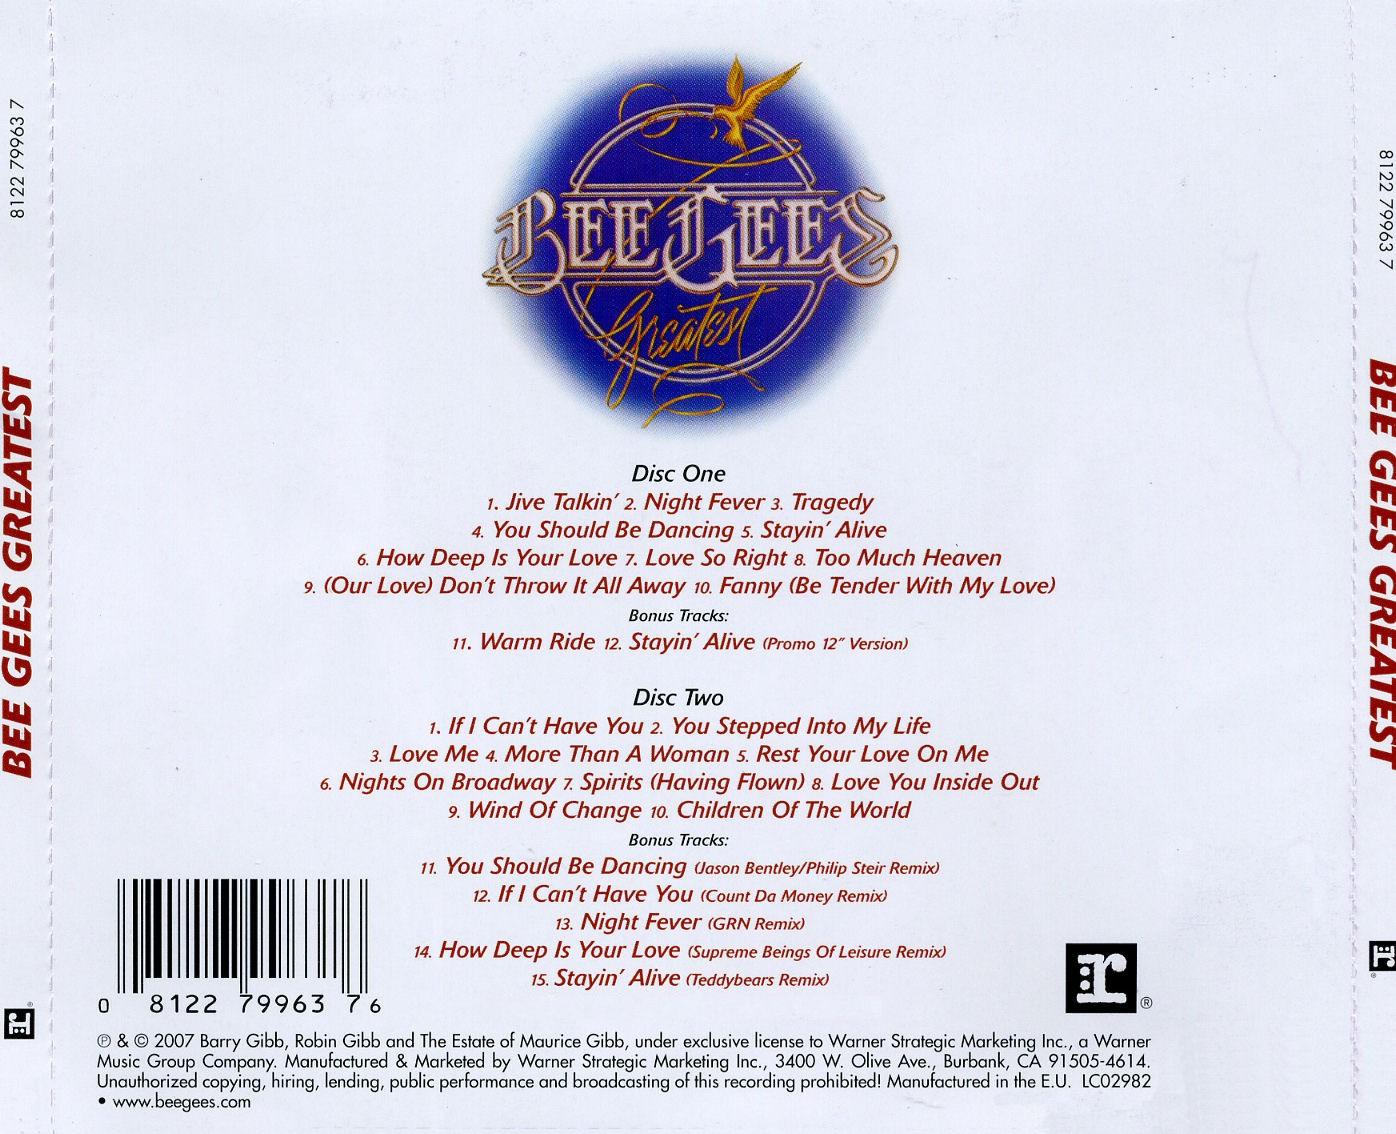 [The+Bee+Gees+-+Greatest+(Special+Edition)+-+trás.jpg]